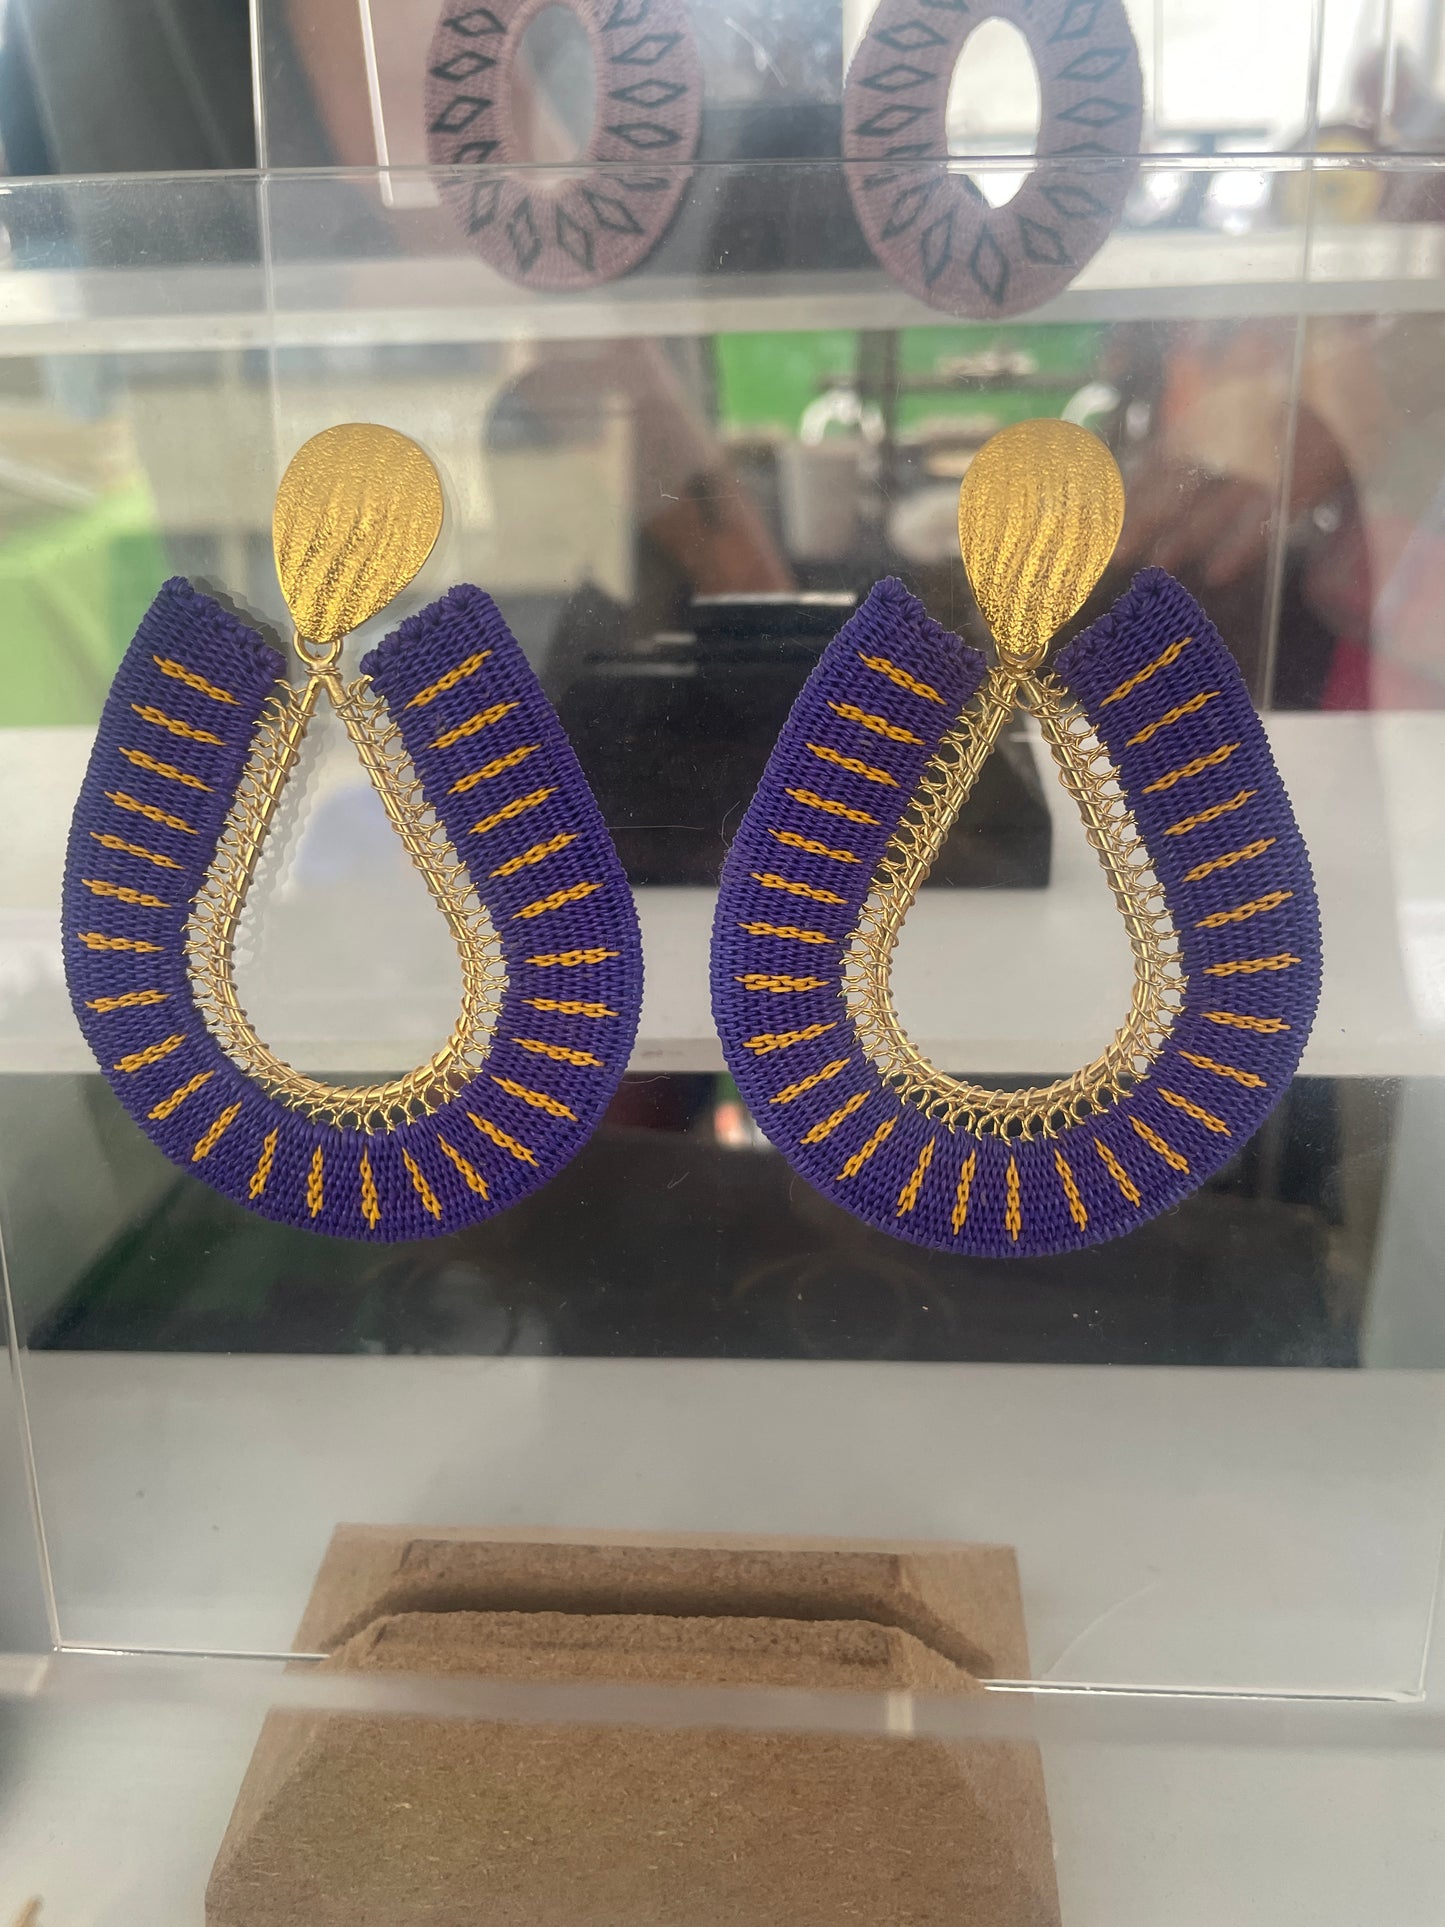 Werregue earrings with gold filled accessories